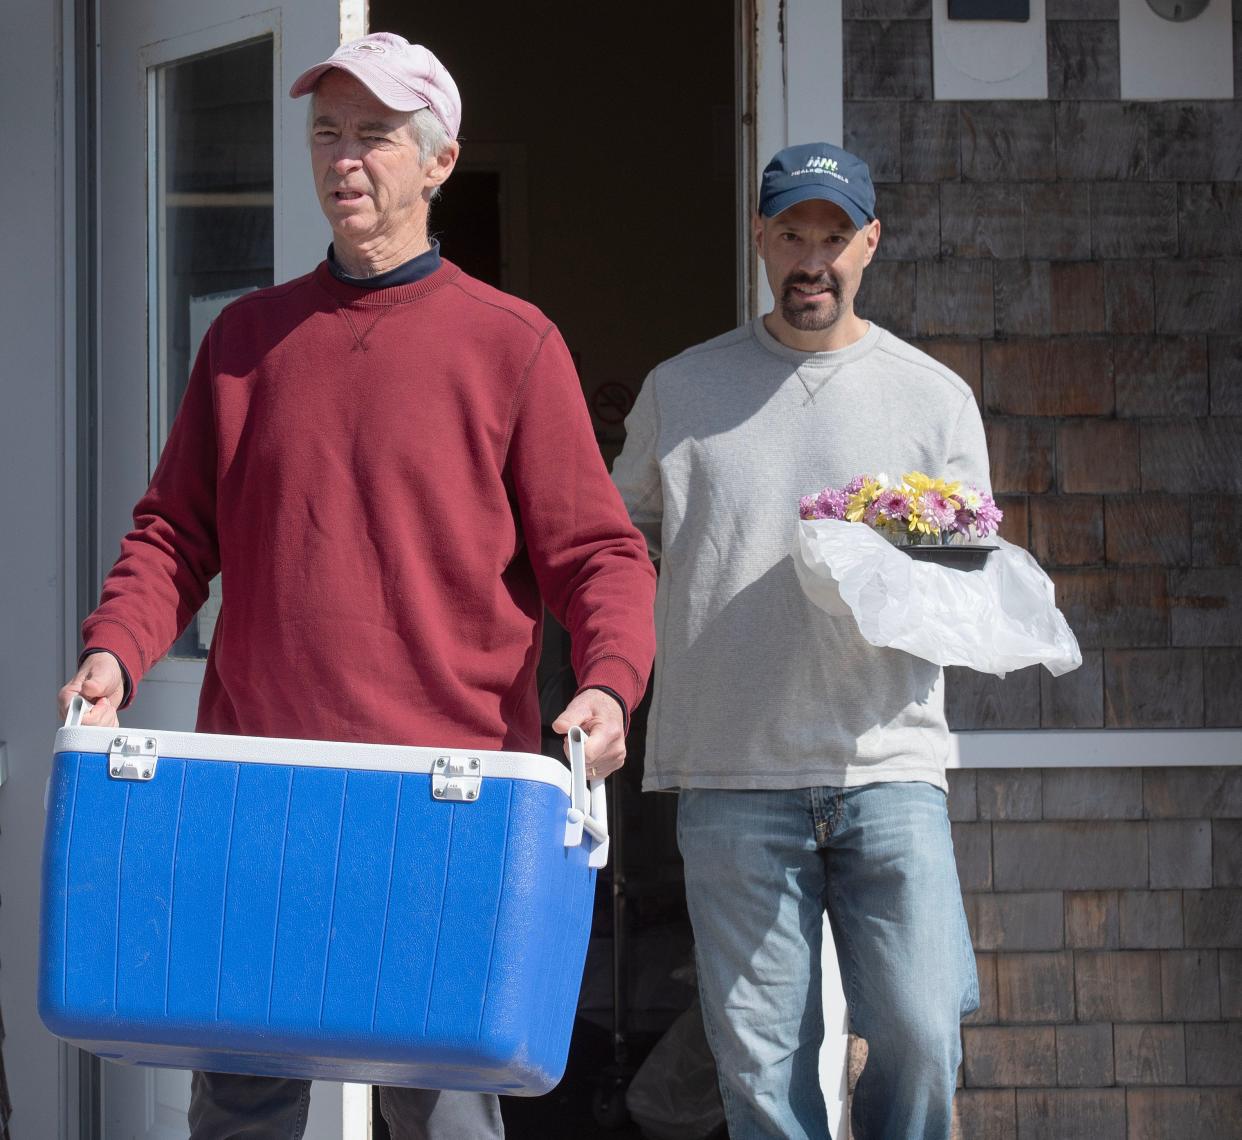 Meals on Wheels driver Richard DeSorgher heads out of the Mashpee Senior Center Thursday with a cooler full of meals, followed by Lou Eppers with flowers for each customer for May Day. DeSorgher has been driving for six years, dropping off 26 meals on his two-hour route.